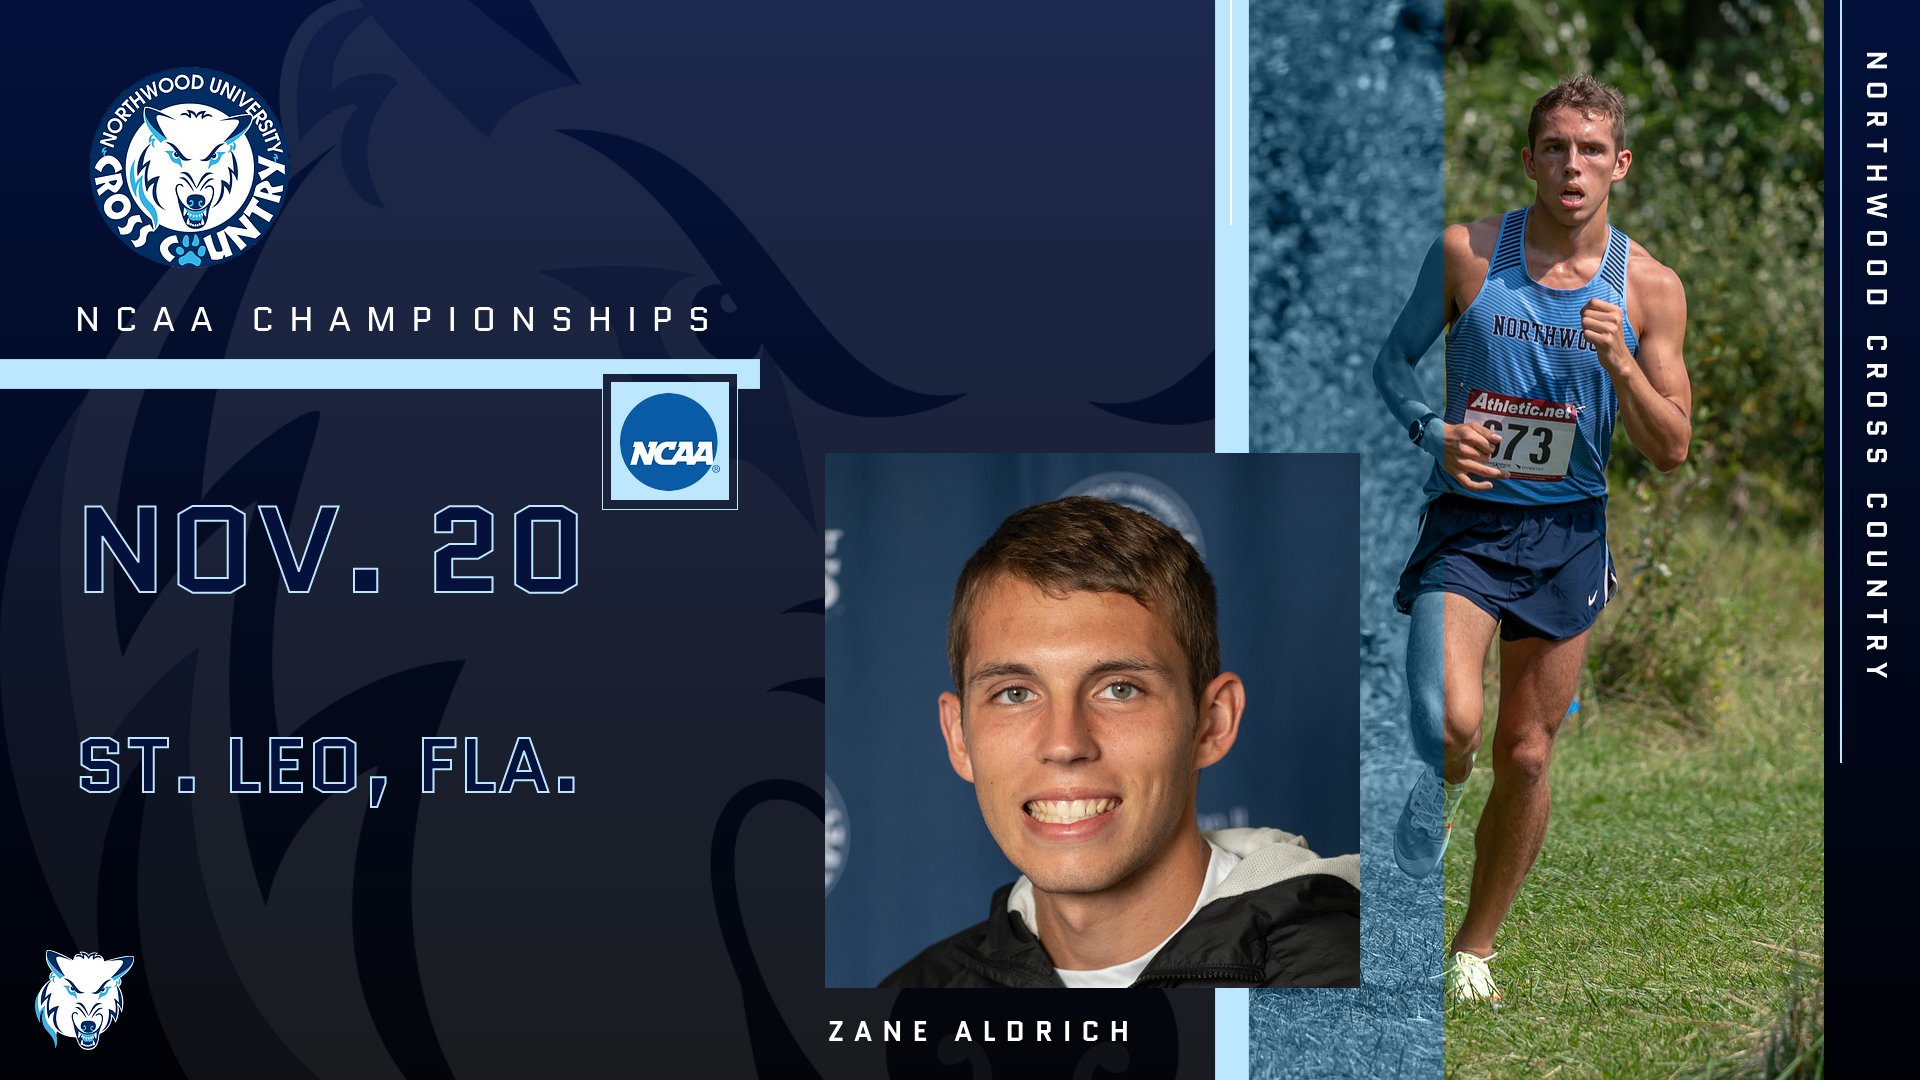 Zane Aldrich Competes At NCAA Cross Country Championships